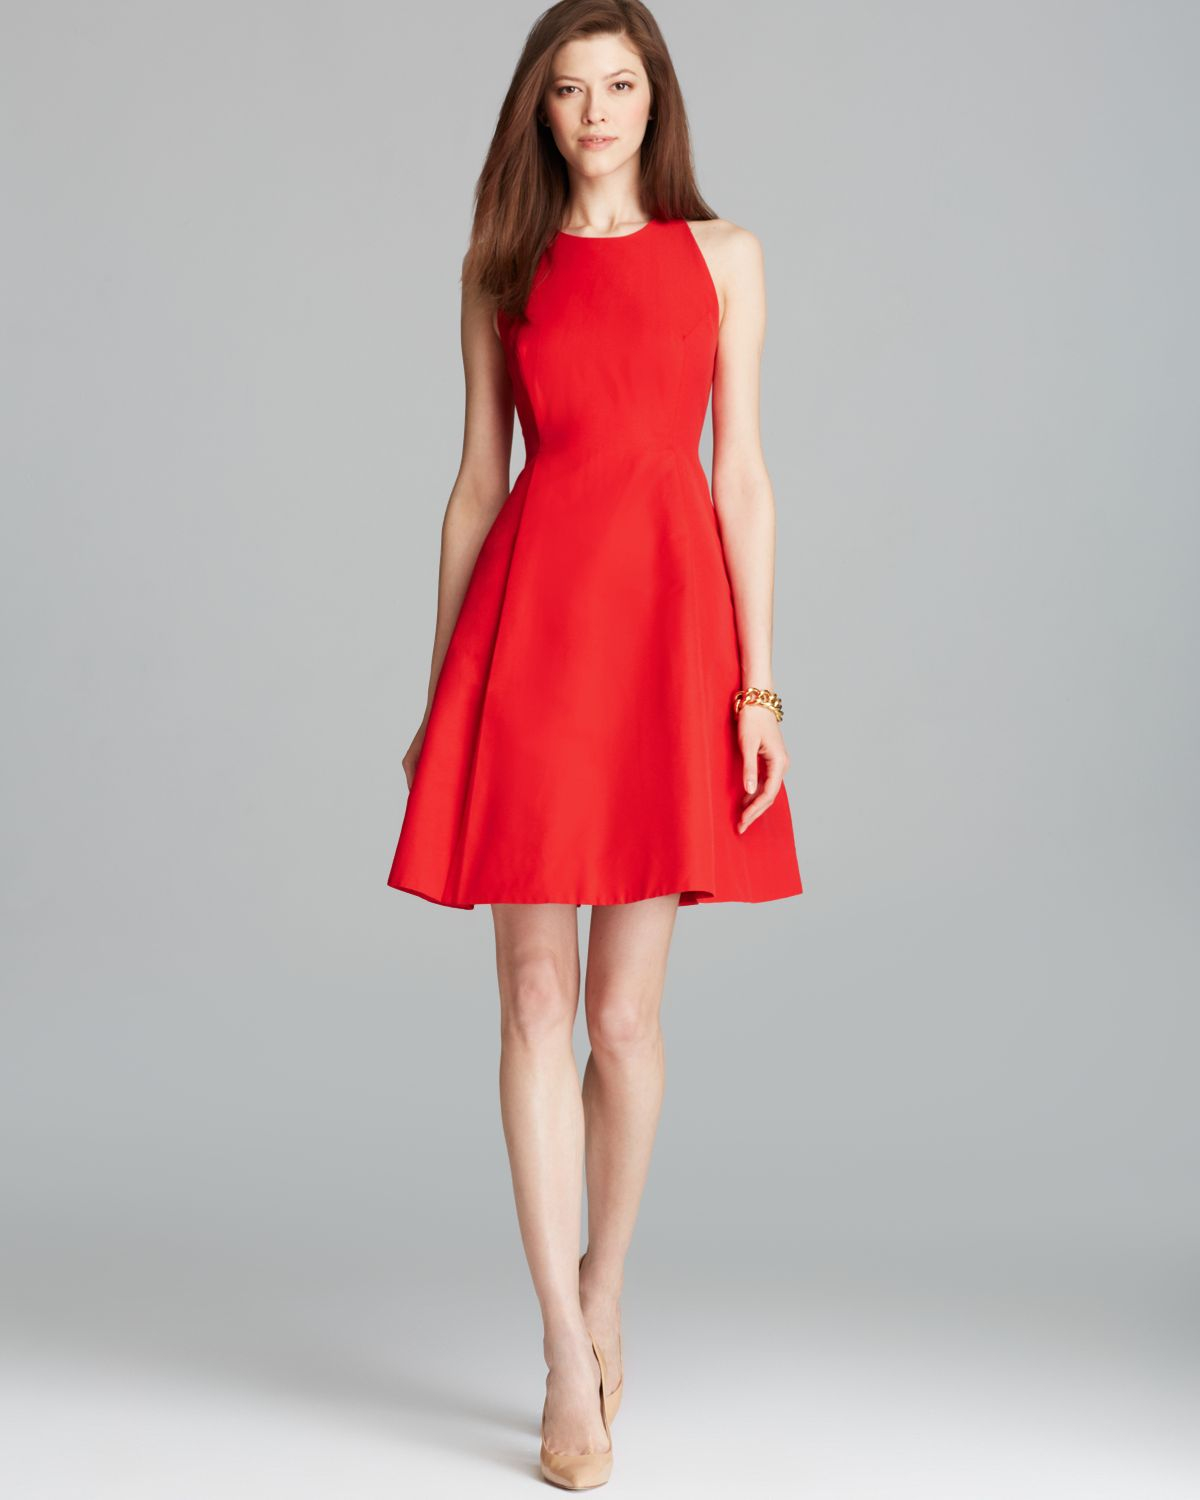 Kate Spade Red Dress Hot Sale, UP TO 70 ...